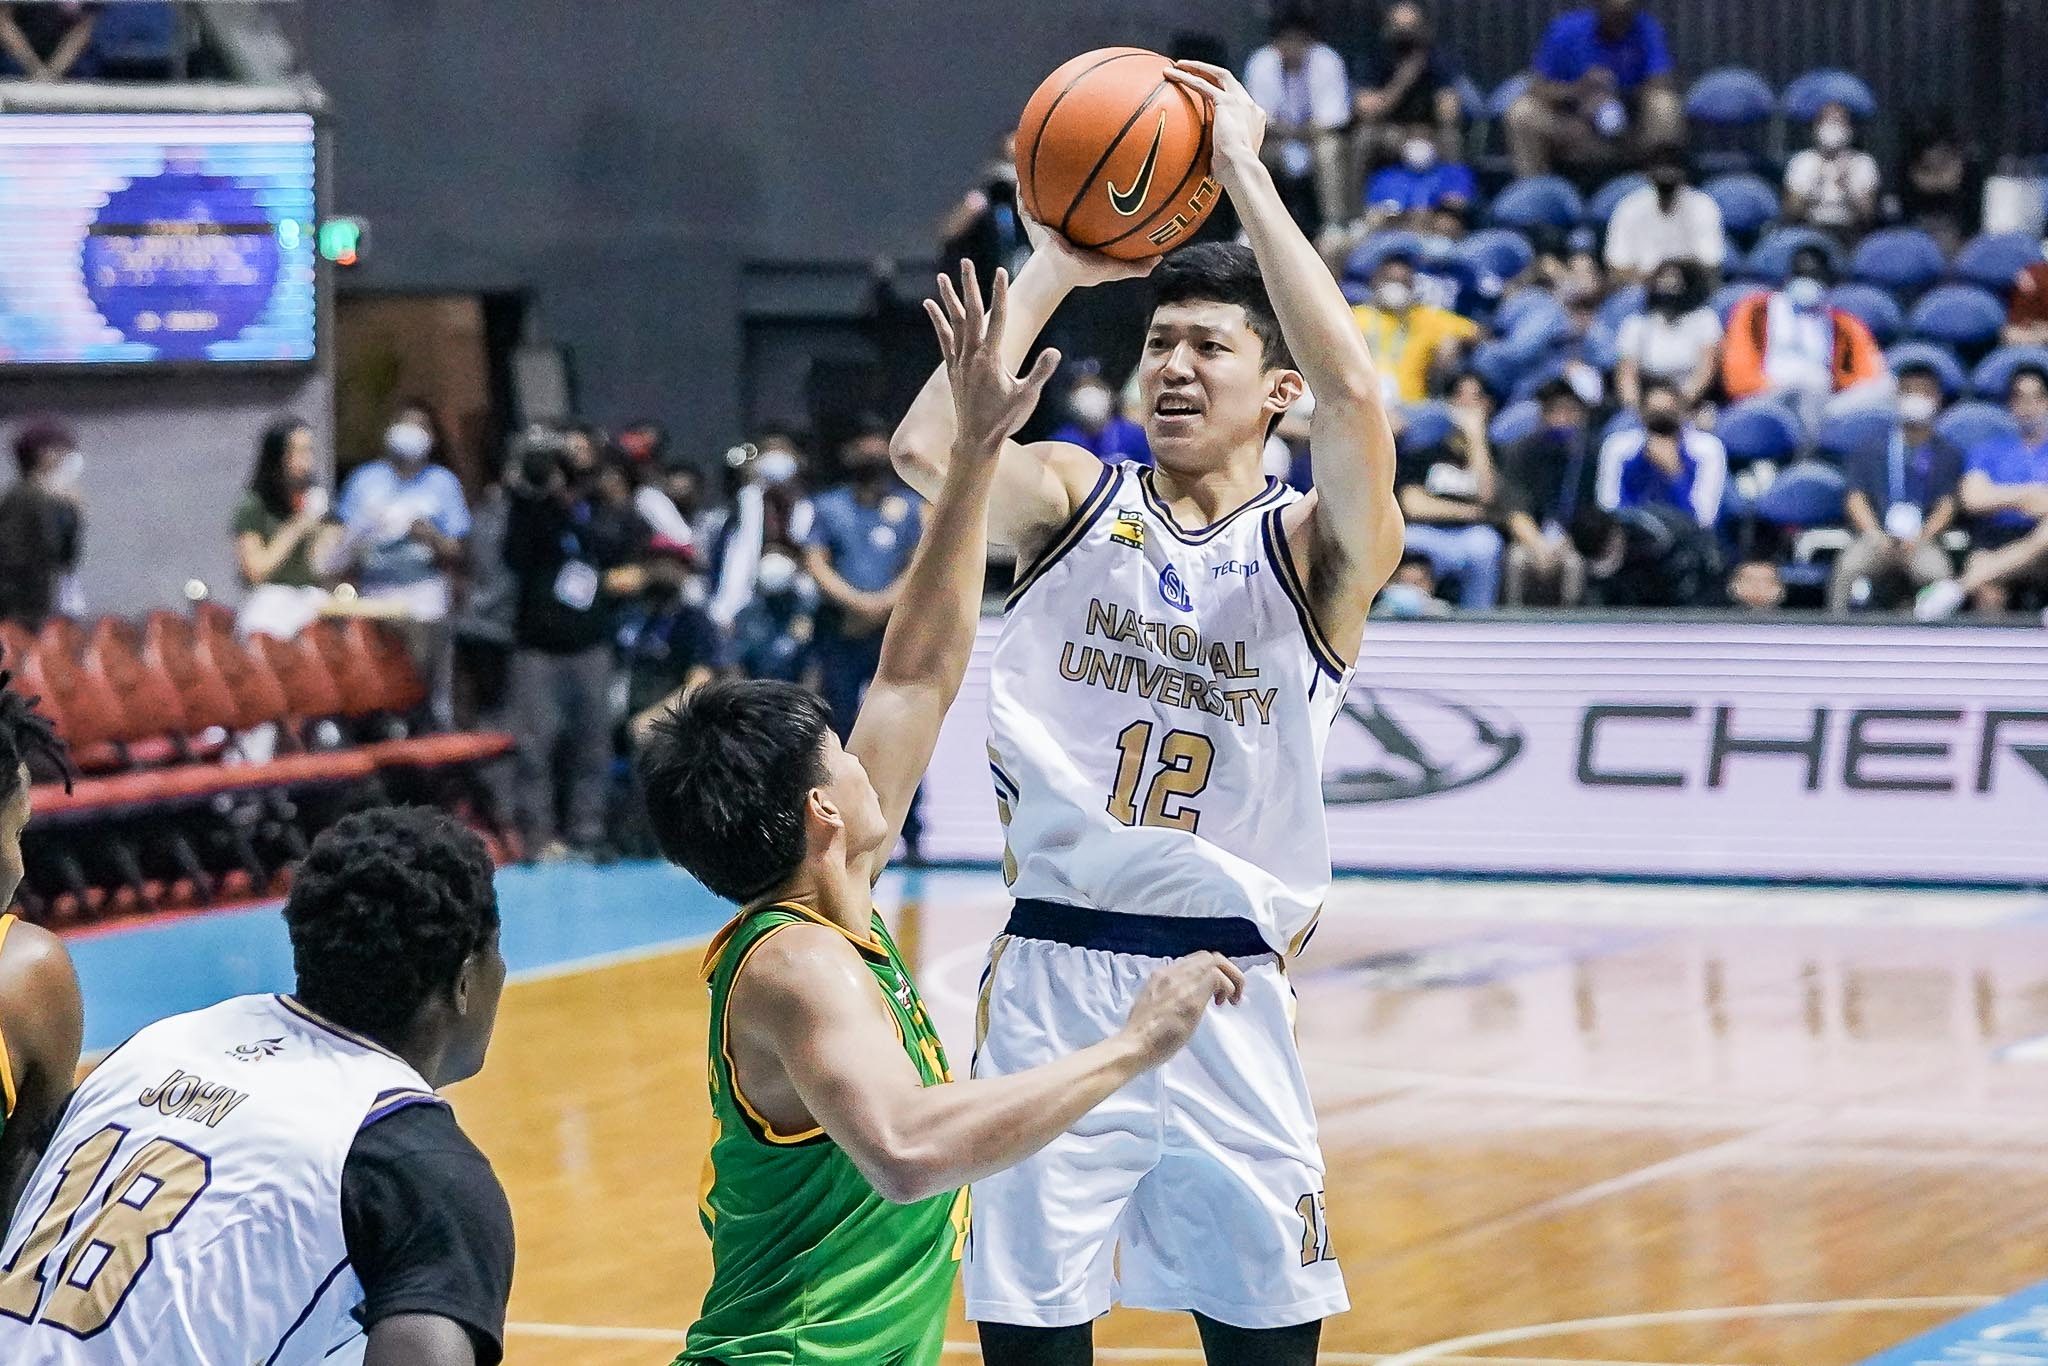 UAAP: NU clinches twice-to-beat, overcomes FEU in men's volleyball